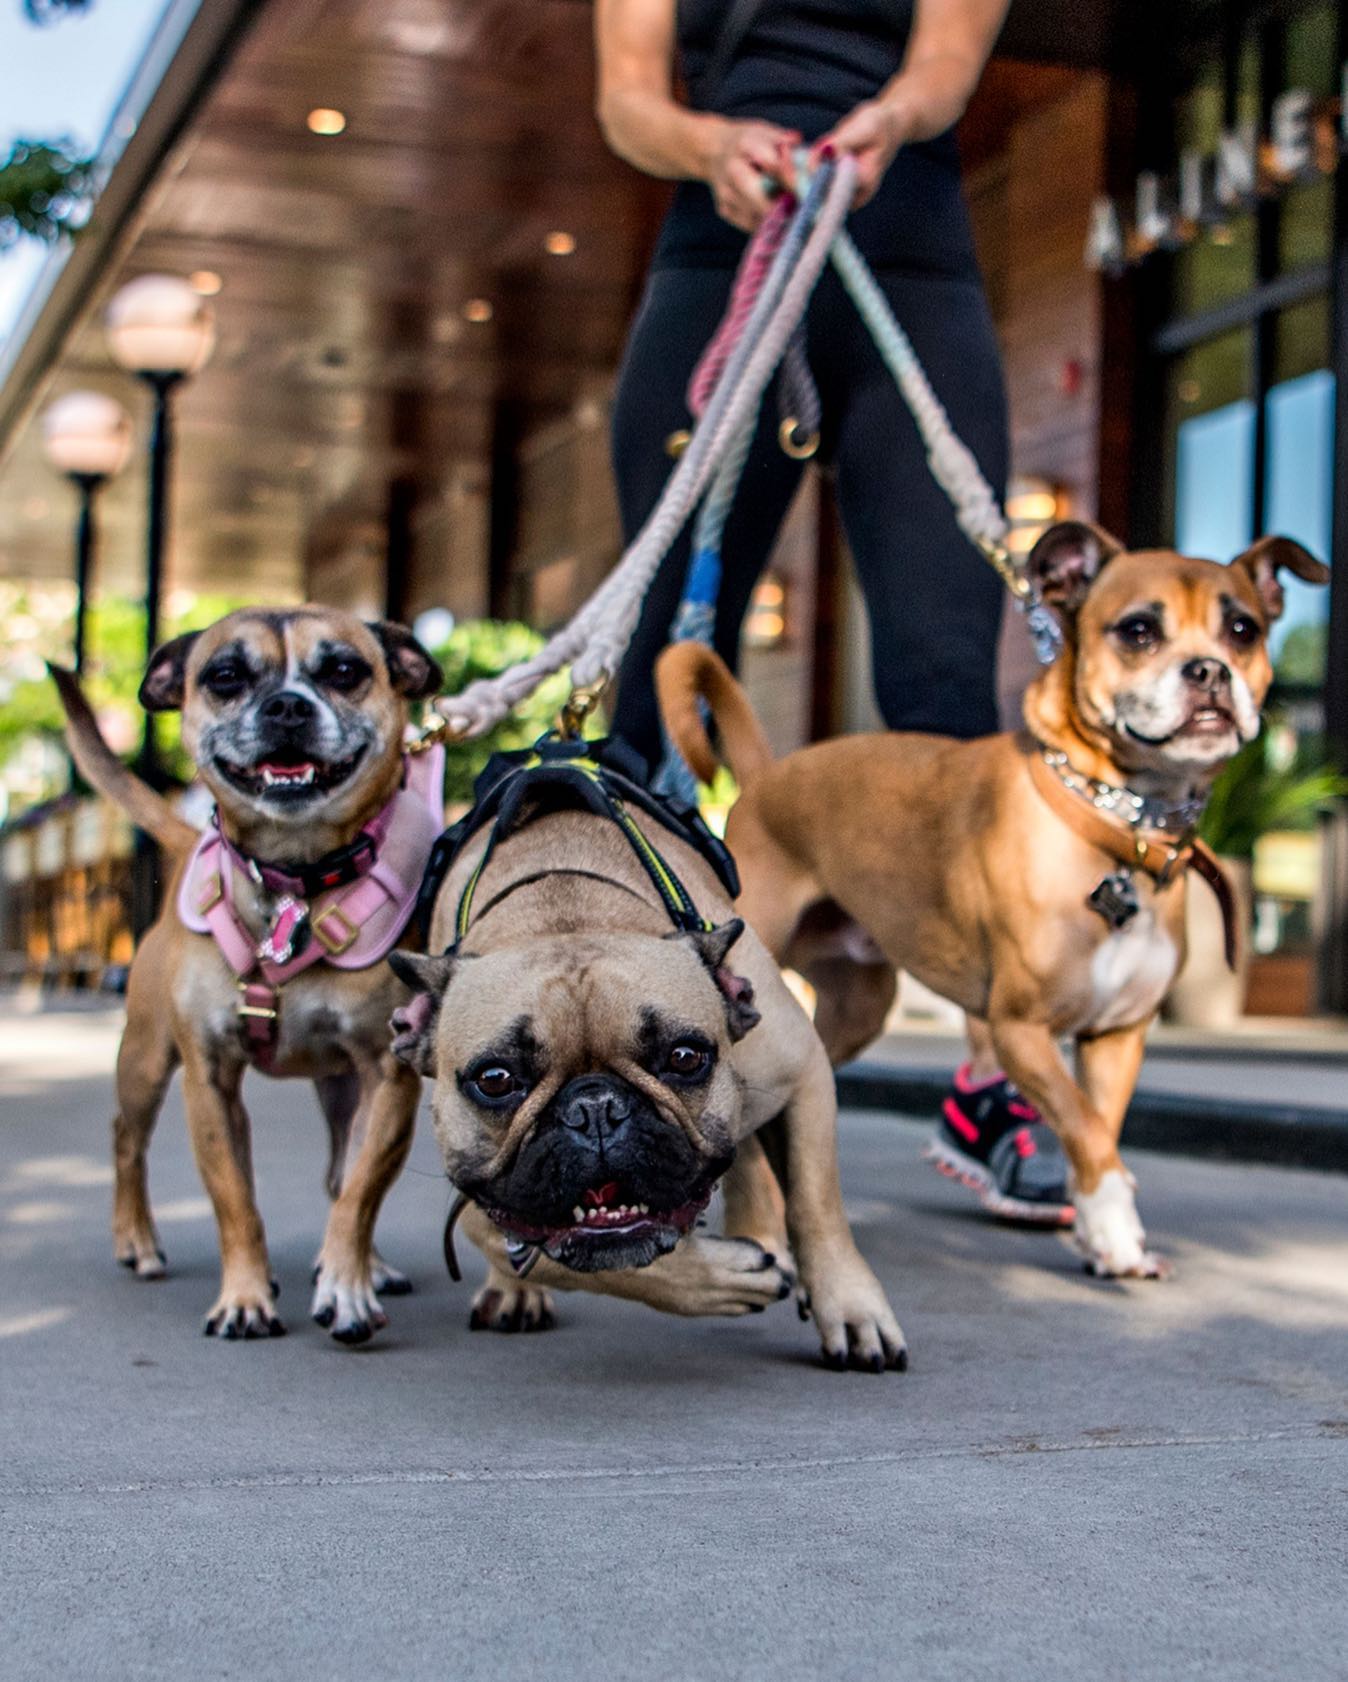 Bring your furry friend to Pets on the Plaza at @cherrycreeknorth this Saturday & Sunday 🐶❤️ Celebrate the dog days of summer and support the @dumbfriendsleague and at Denver’s newest pet-friendly event with live music, costume contests, local pet products, and more!
.
.
.
#denverdogs #cherrycreeknorth #5280dogs #denverpets #thingstodoindenver #petsofinstagram